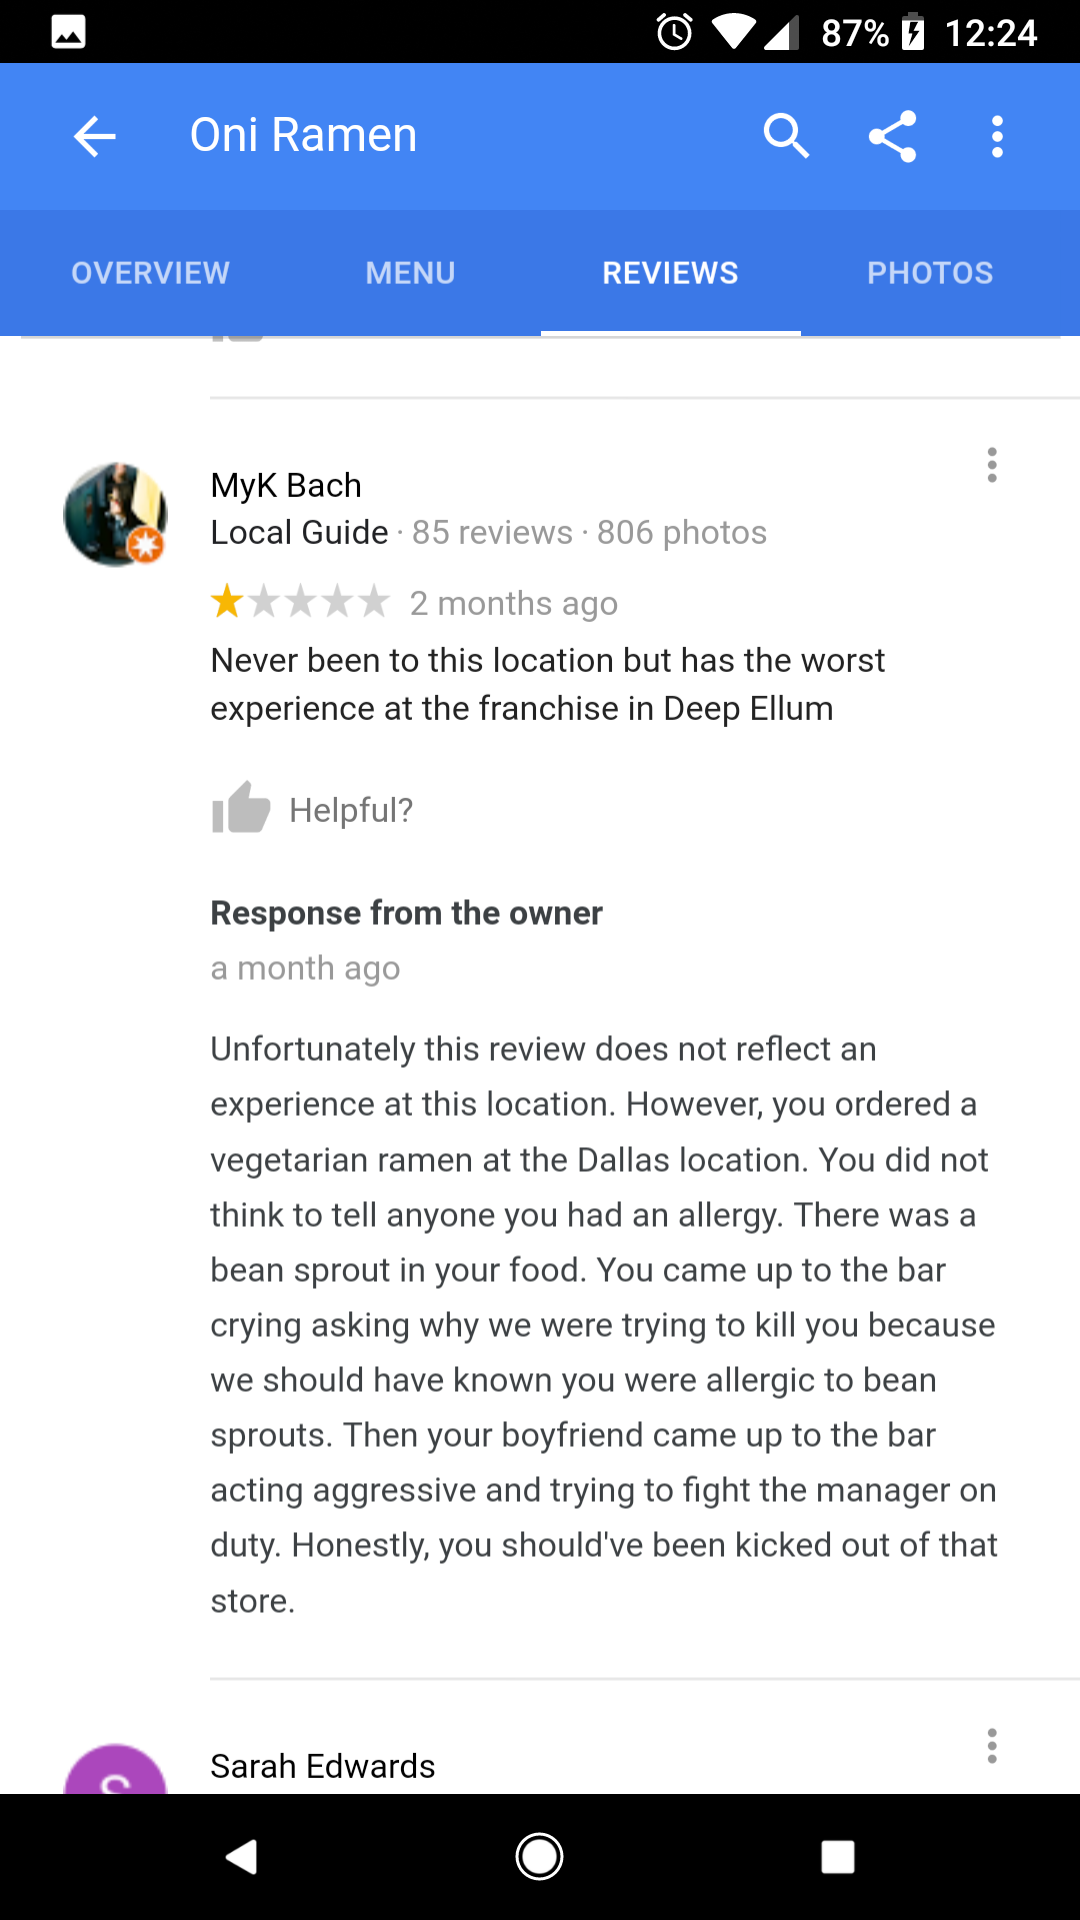 Reading reviews to find a restaurant for tonight. Definitely going to support this owner. There's plenty more gems too...